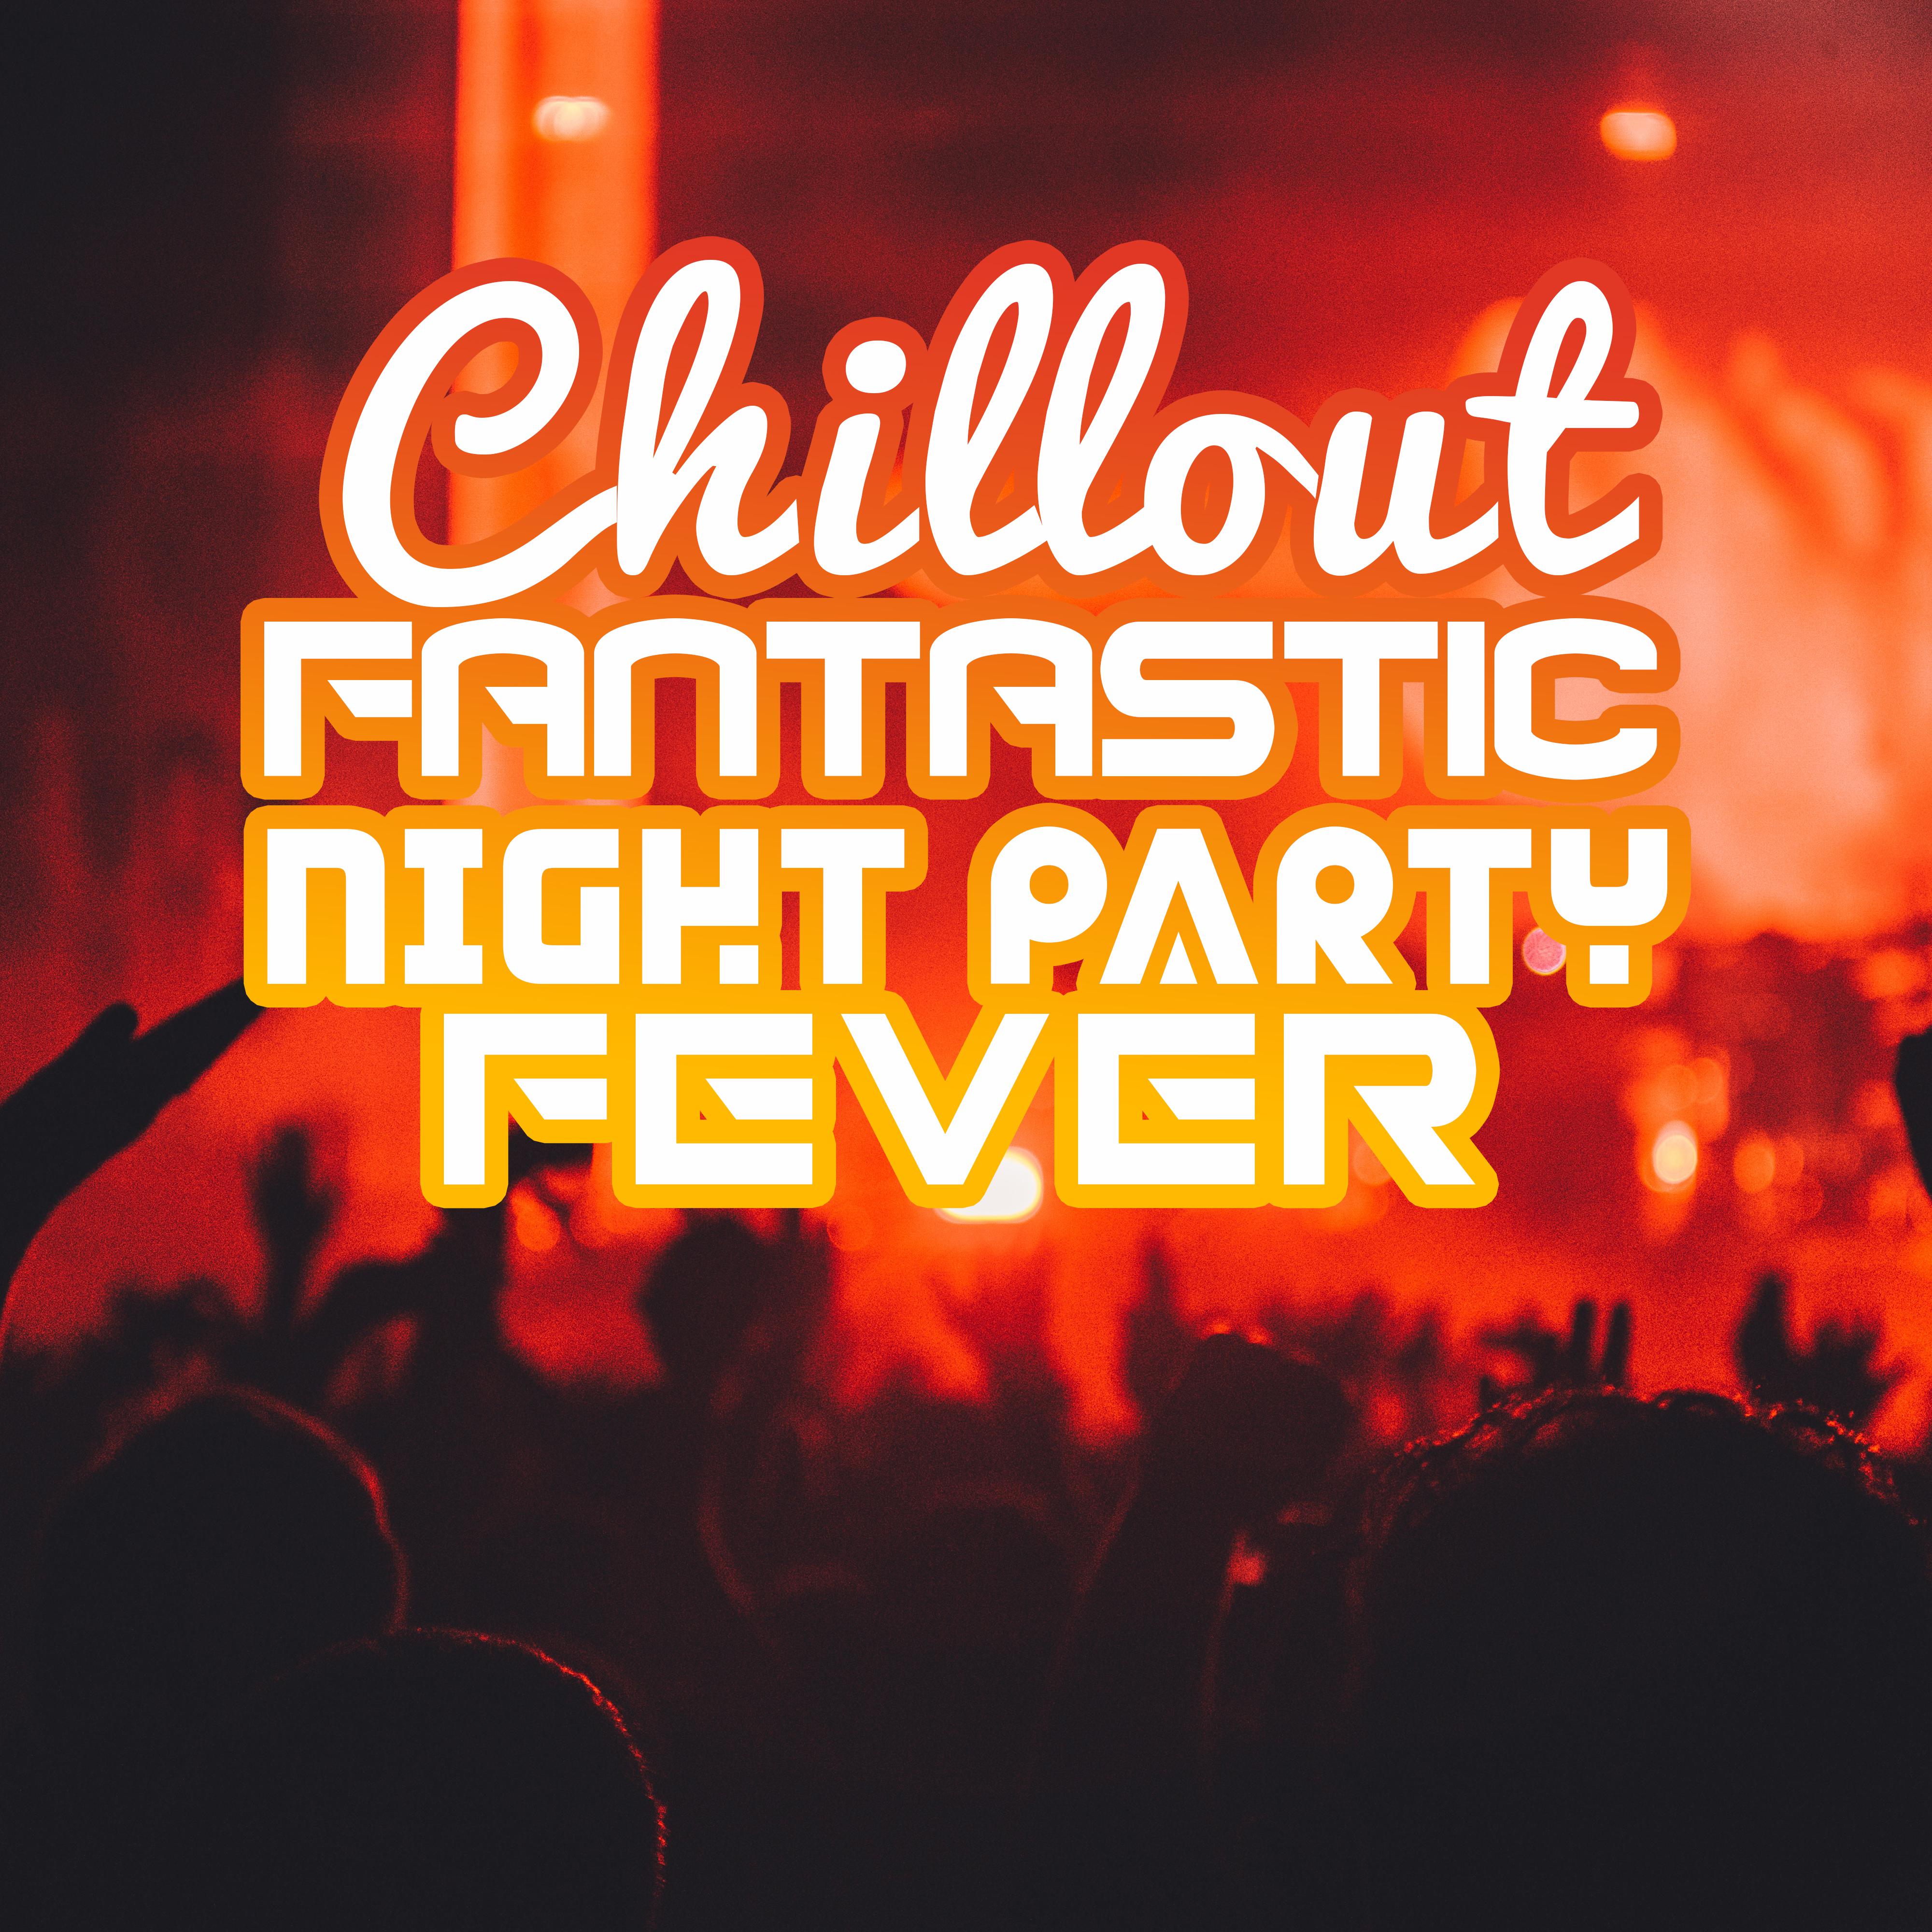 Chillout Fantastic Night Party Fever